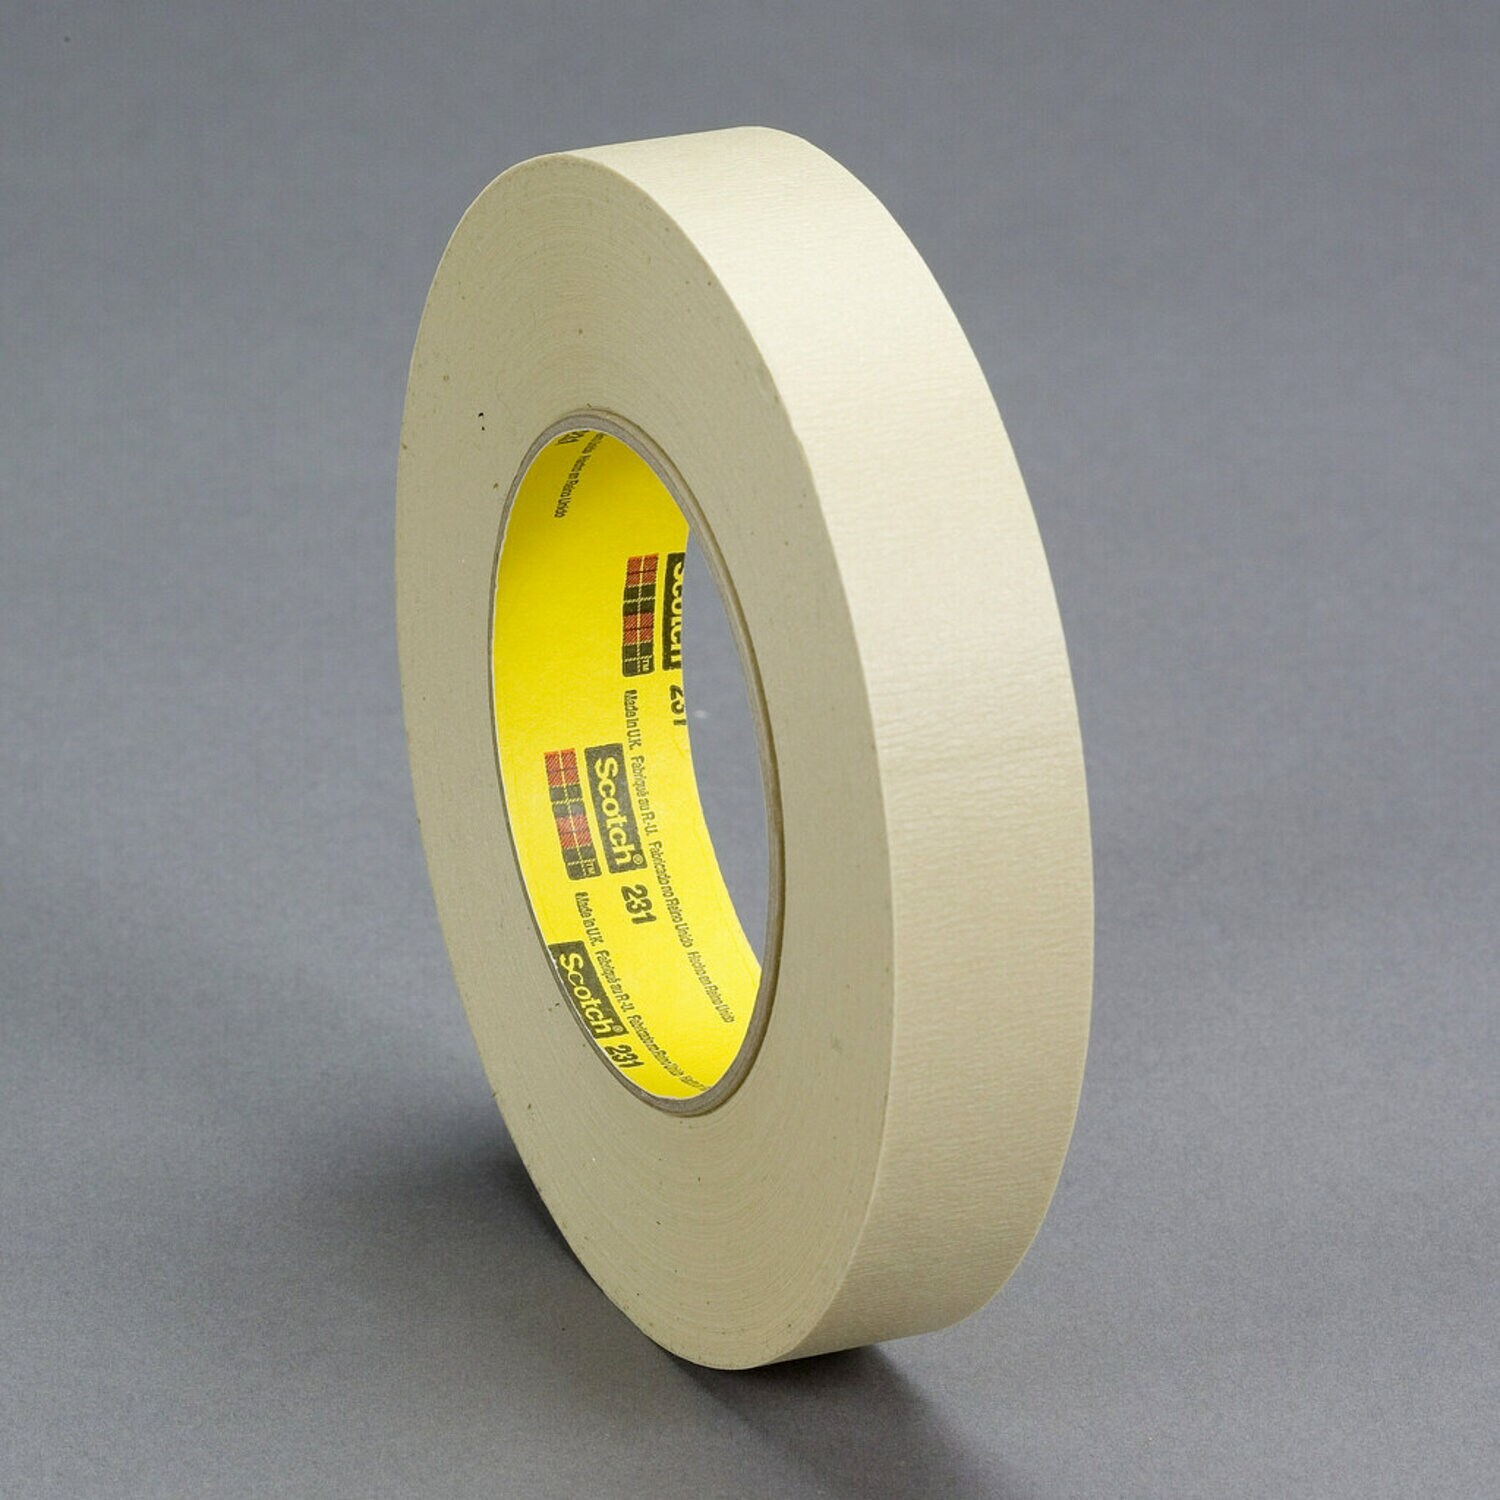 7010295786 - 3M Paint Masking Tape 231/231A, Tan, 3-1/4 in x 60 yd, 7.6 mil, 16 Roll/Case